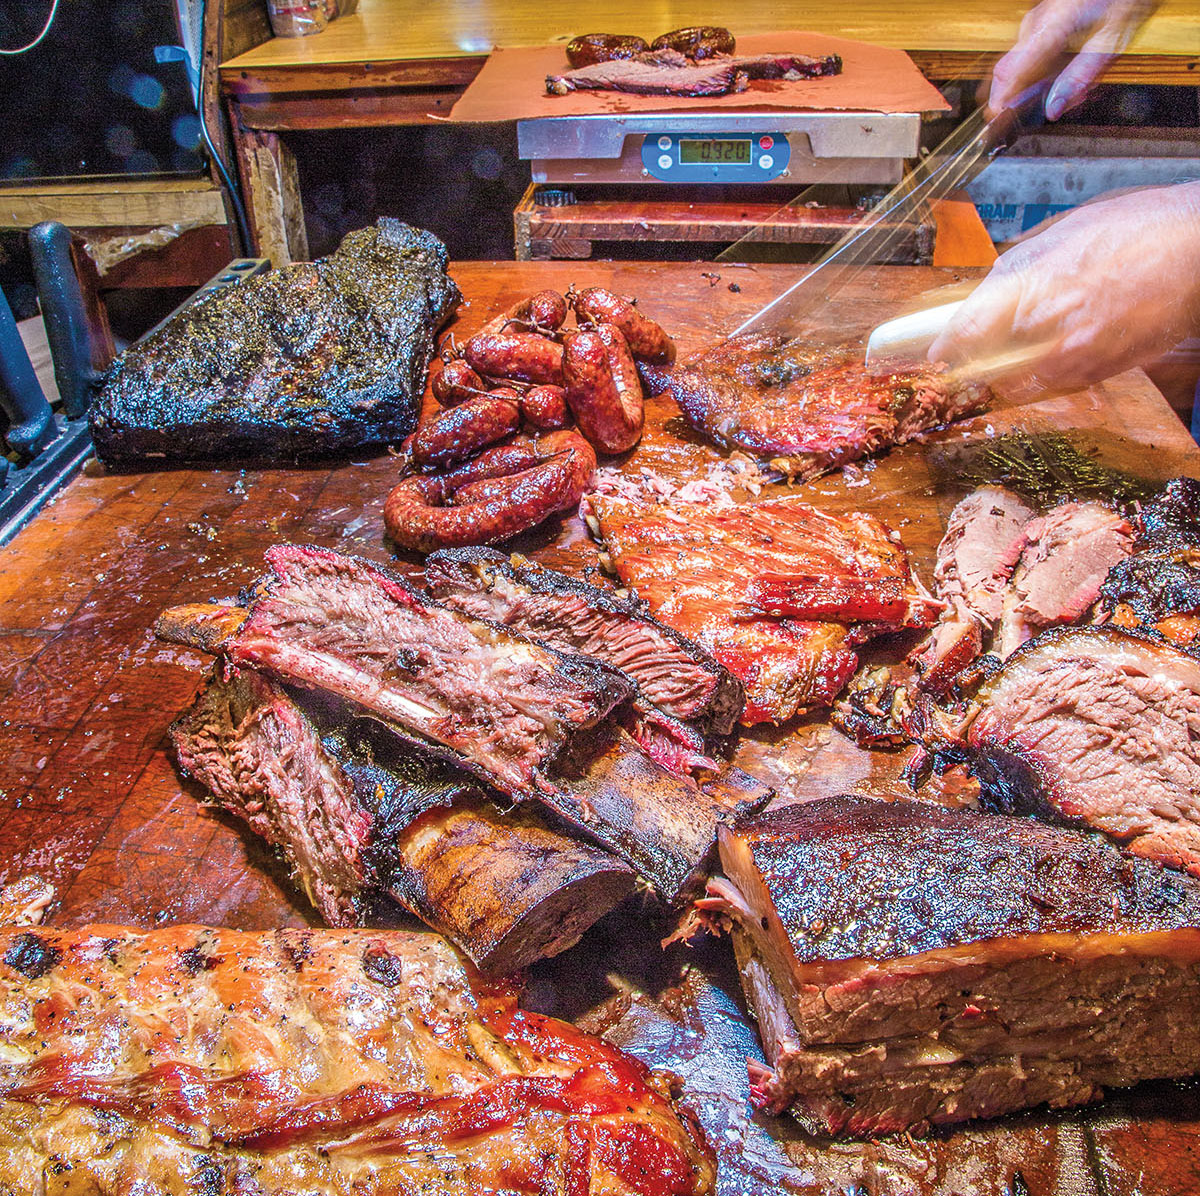 A person slices meat around numerous barbecue offerings in front of a small scale